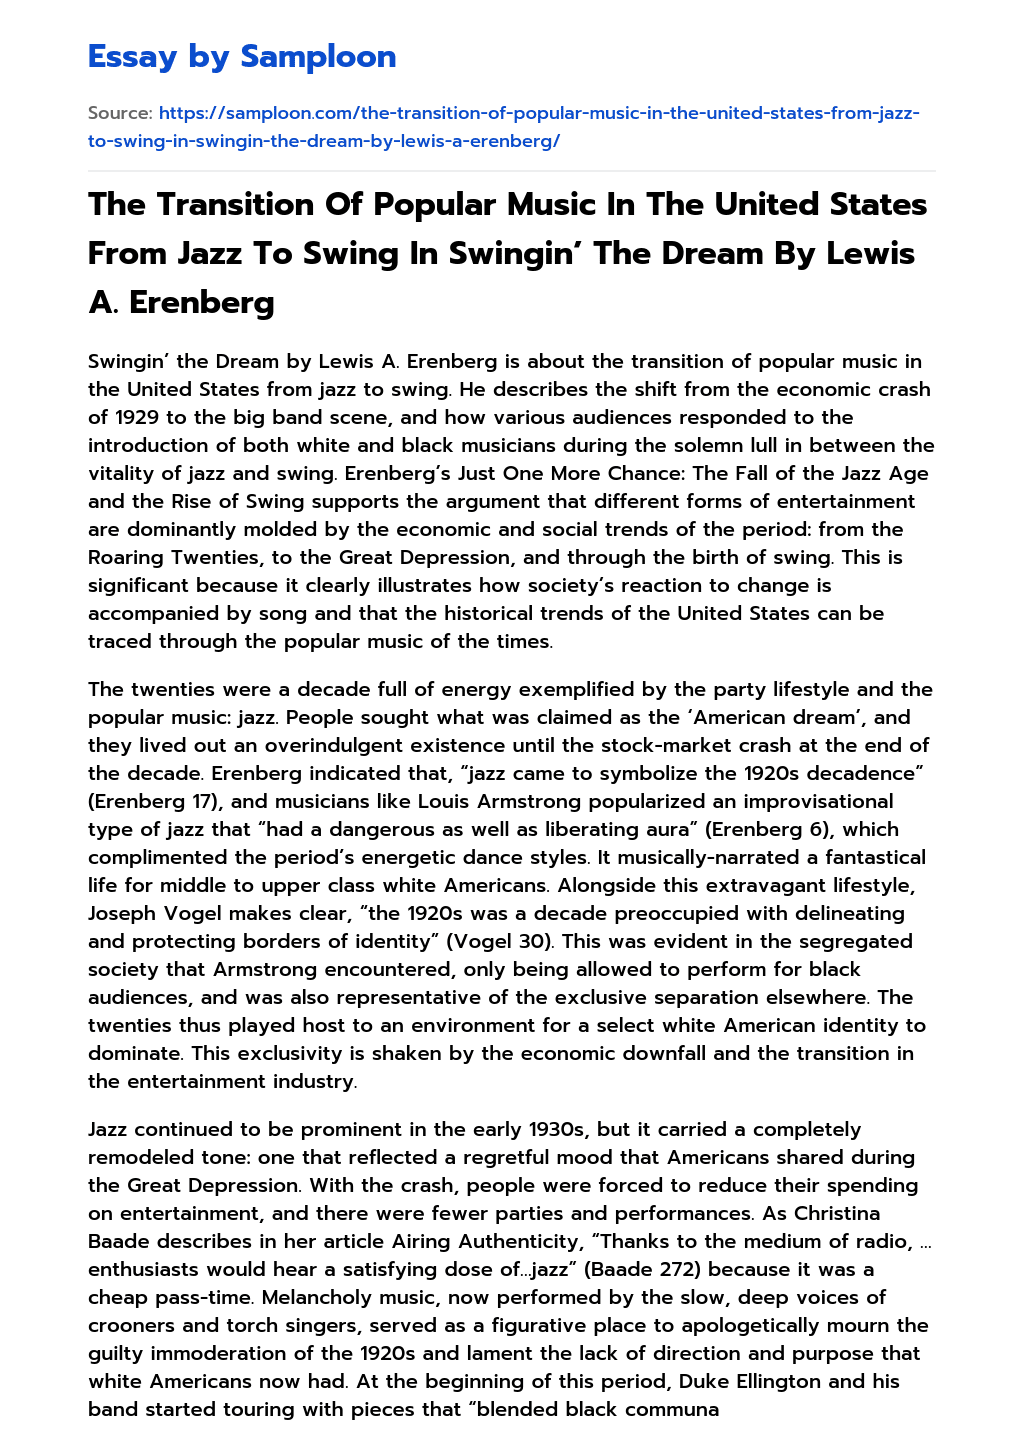 The Transition Of Popular Music In The United States From Jazz To Swing In Swingin’ The Dream By Lewis A. Erenberg essay